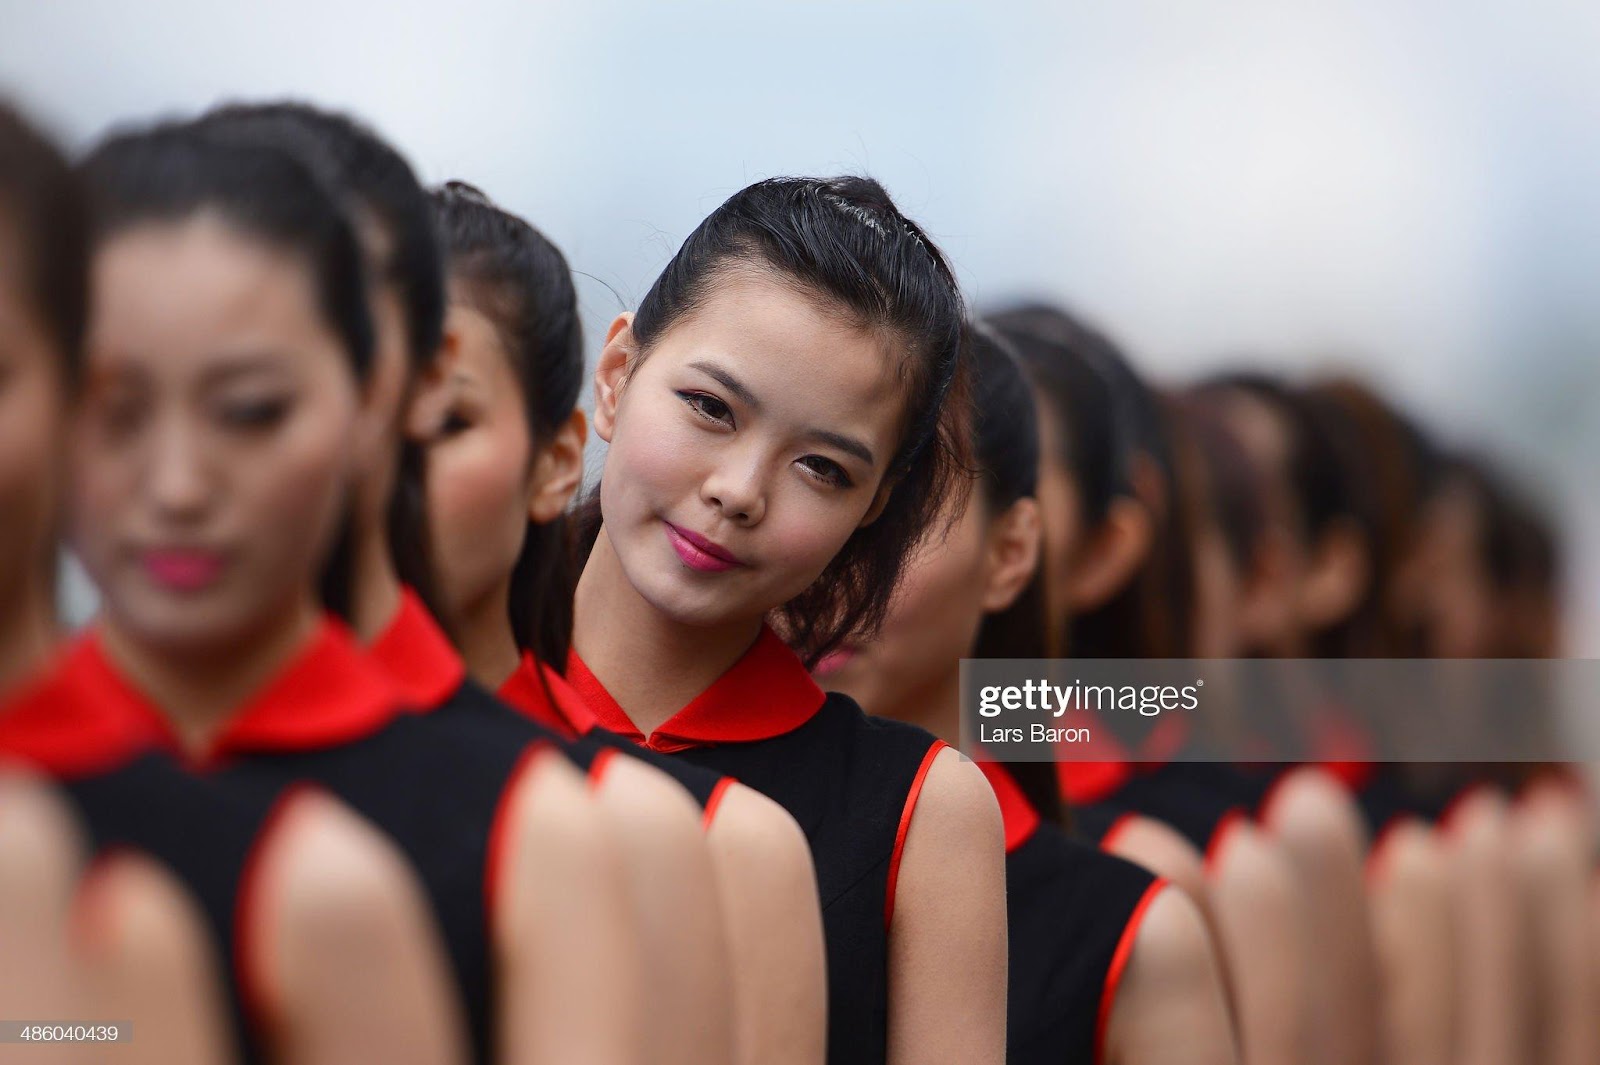 D:\Documenti\posts\posts\Women and motorsport\foto\Getty e altre\grid-girls-are-pictured-prior-to-the-chinese-formula-one-grand-prix-picture-id486040439.jpg